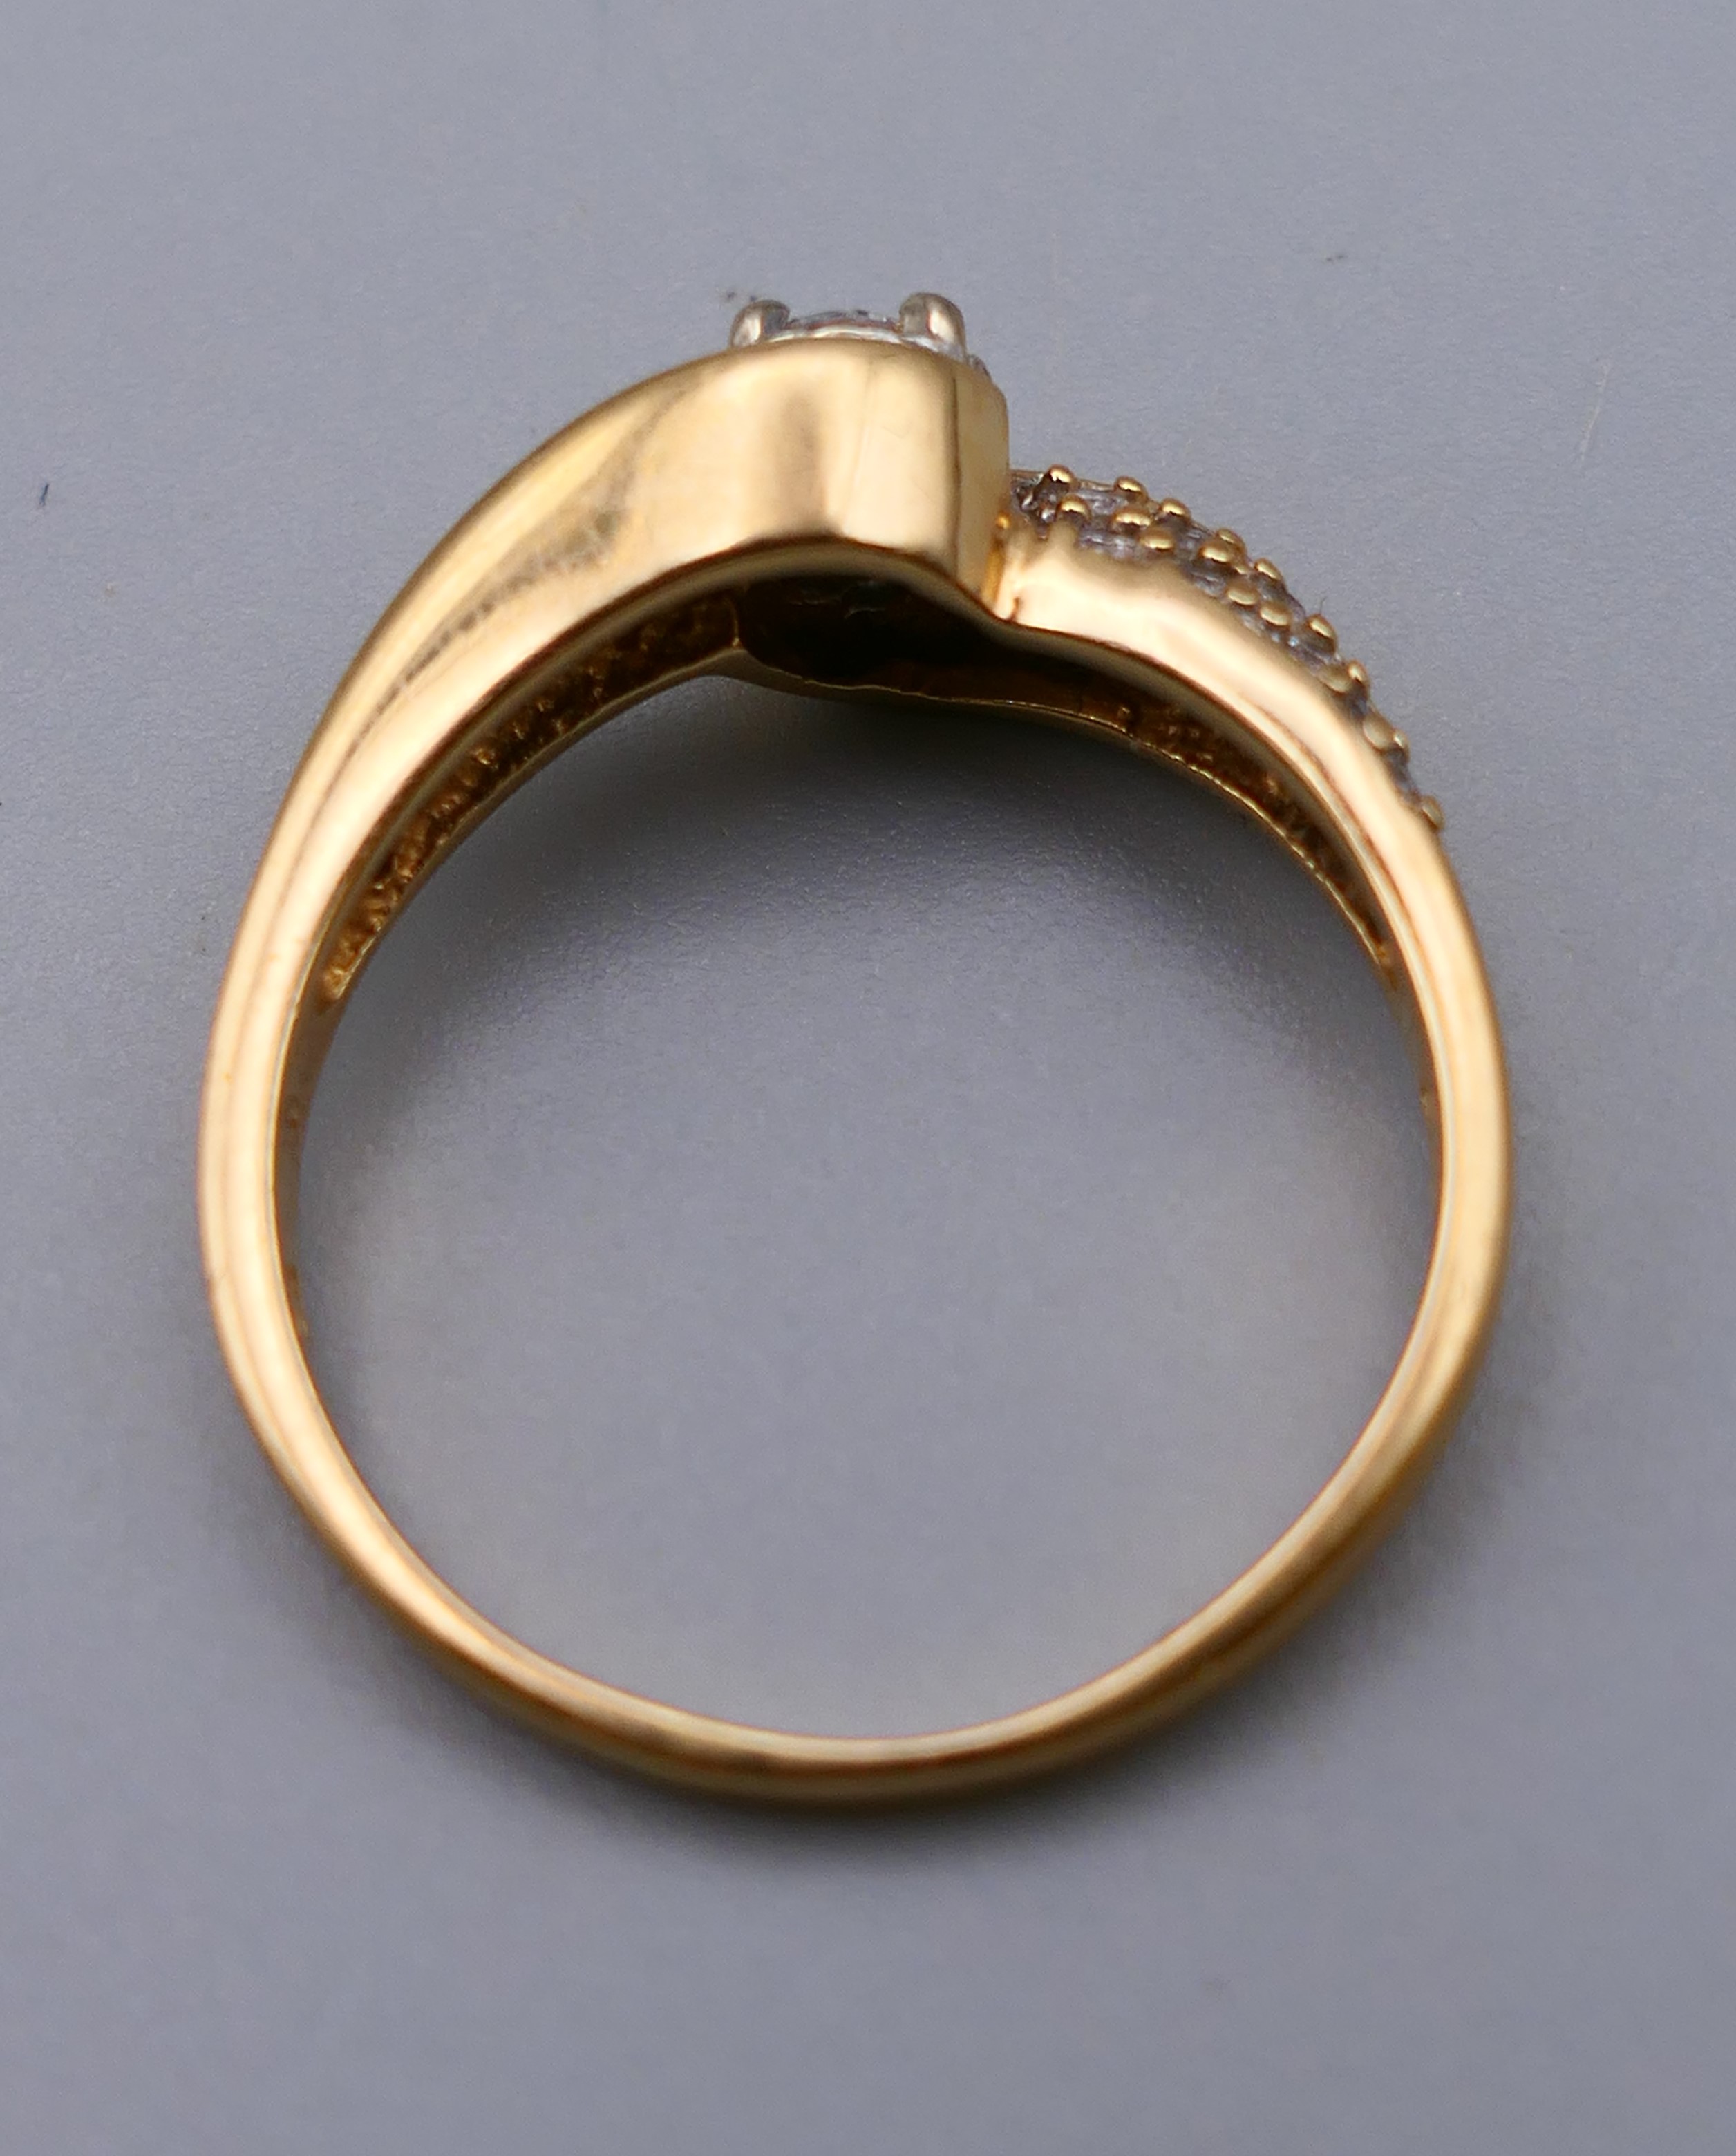 An 18 ct gold and diamond crossover ring, approximately 0.25 carat of diamonds. Ring size P/Q. 4. - Image 5 of 8